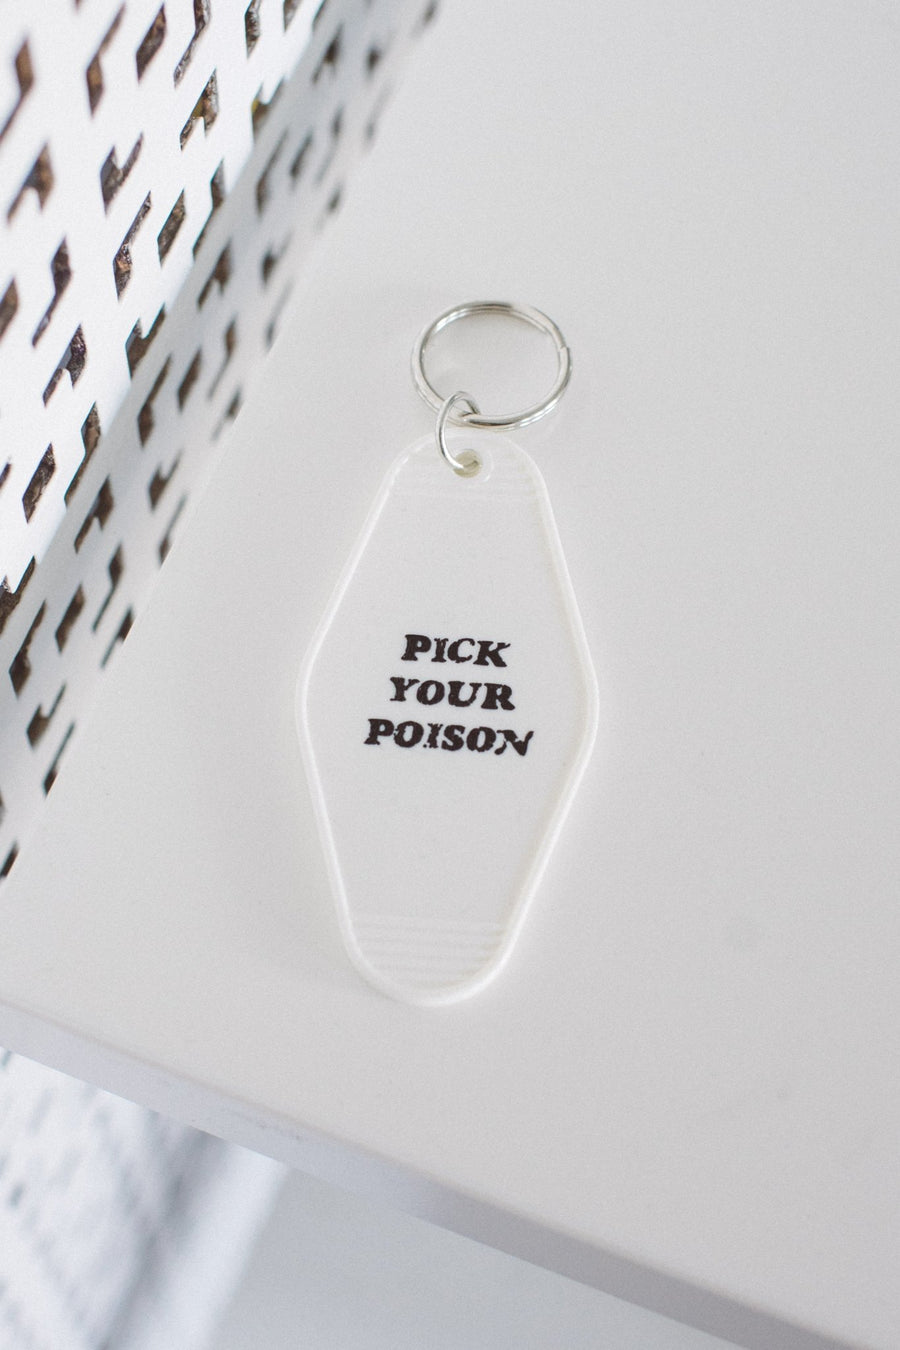 Pick your Poison Key Tag